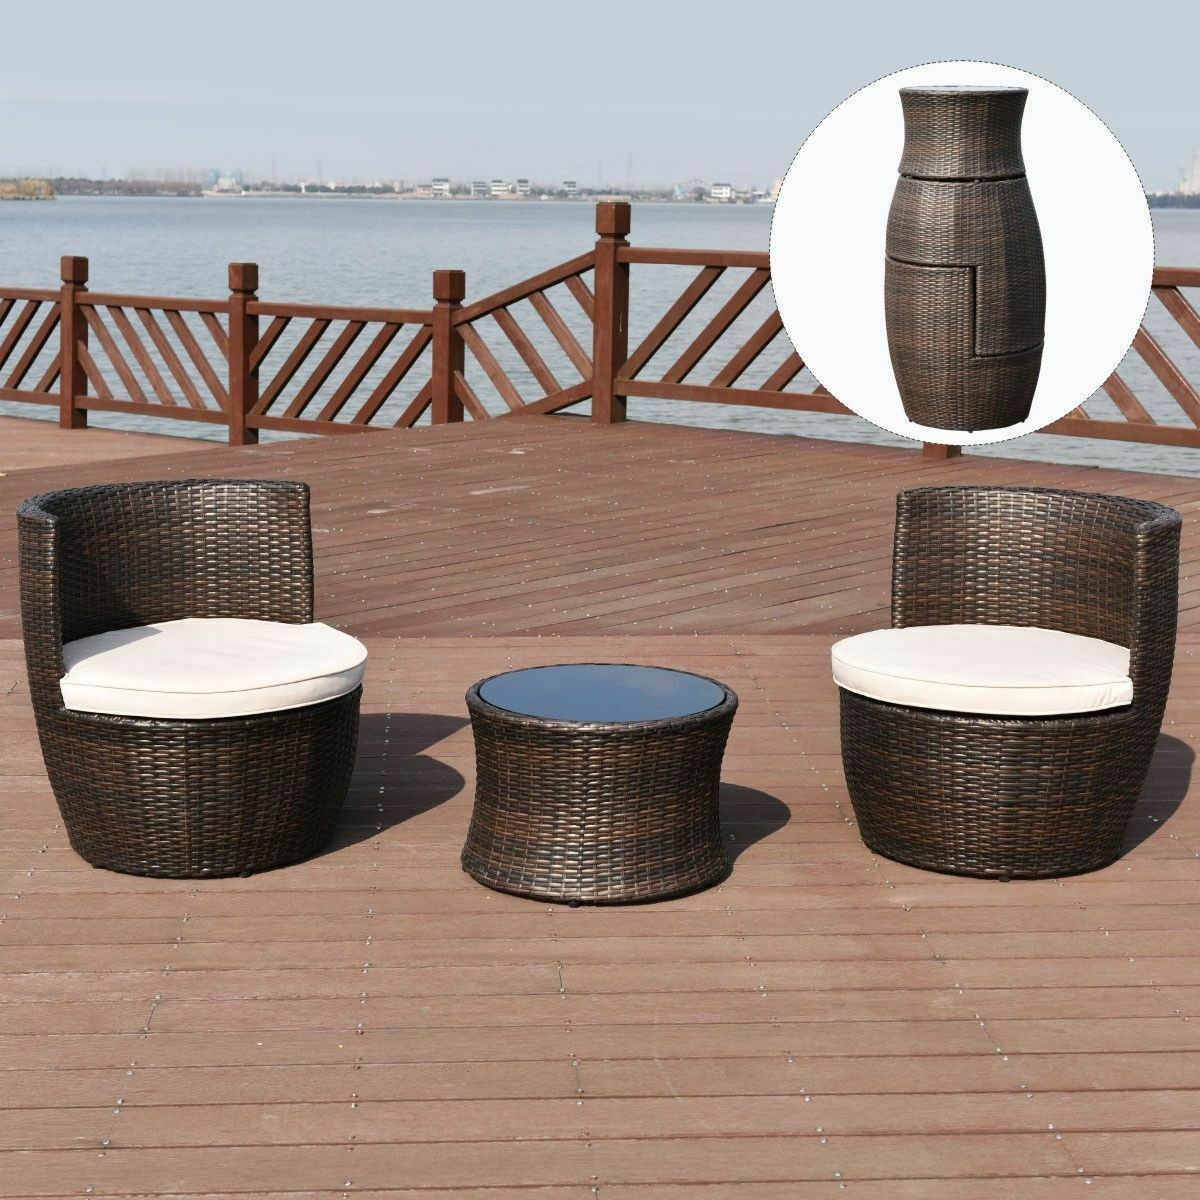 3 Pcs Stackable Rattan Furniture Set Chair Coffee Table Cushioned For Outdoor Patio Porch Garden